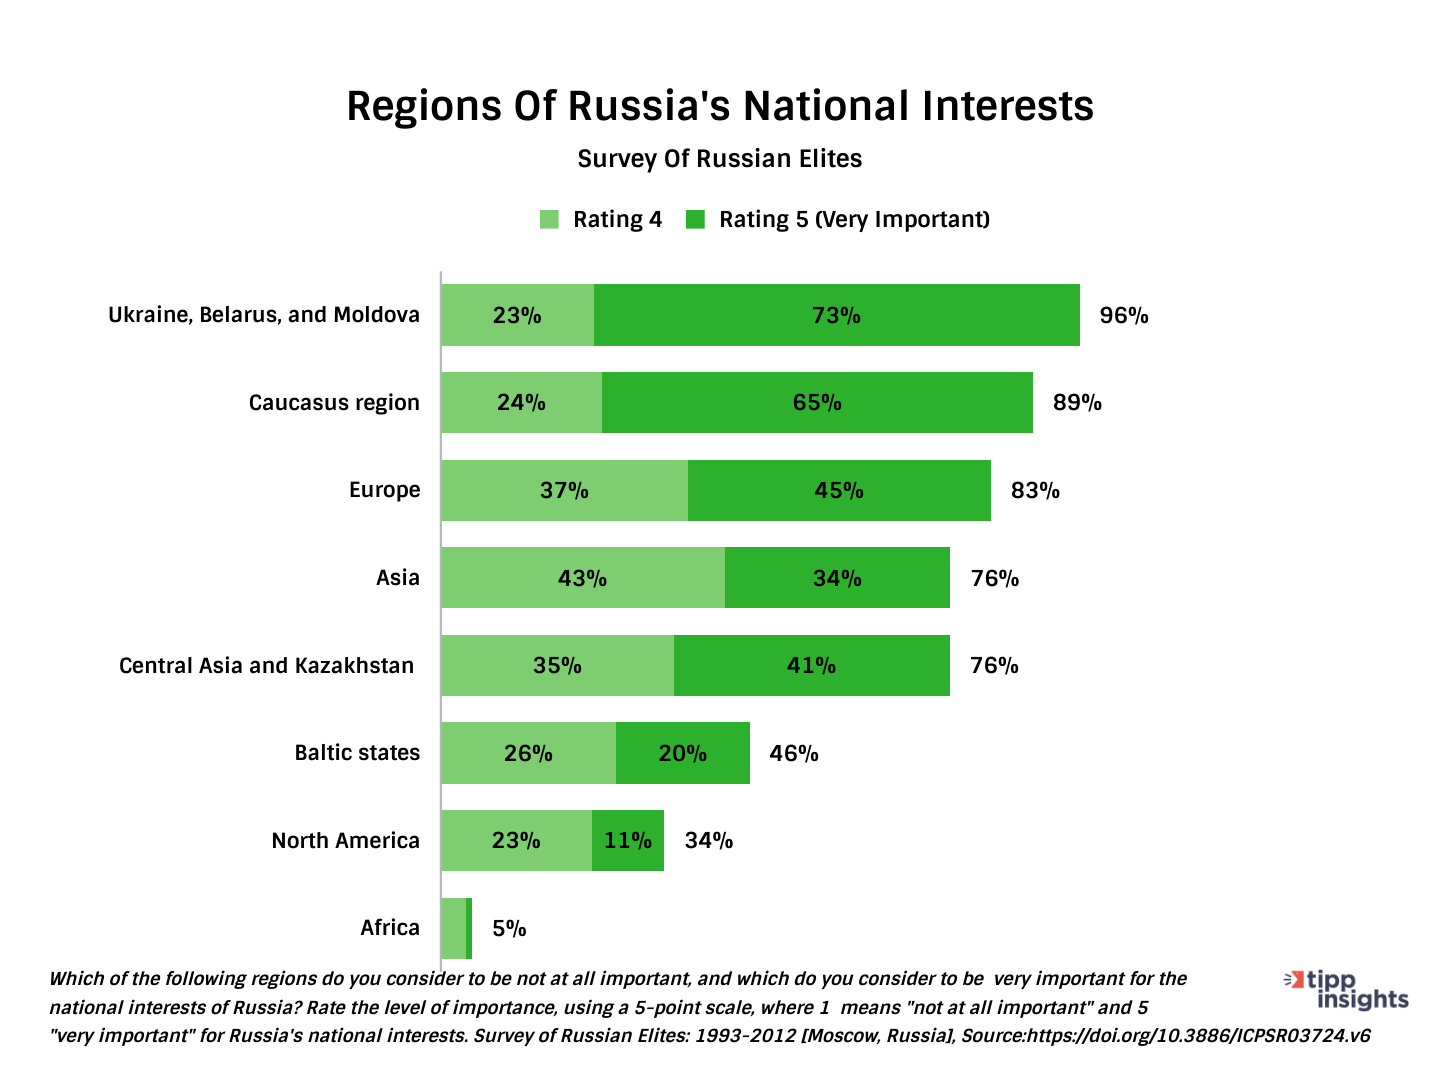 Survey of Russian Elites and Oligarchs 1993-2012, which geographic regions are most important to Russian national interests?